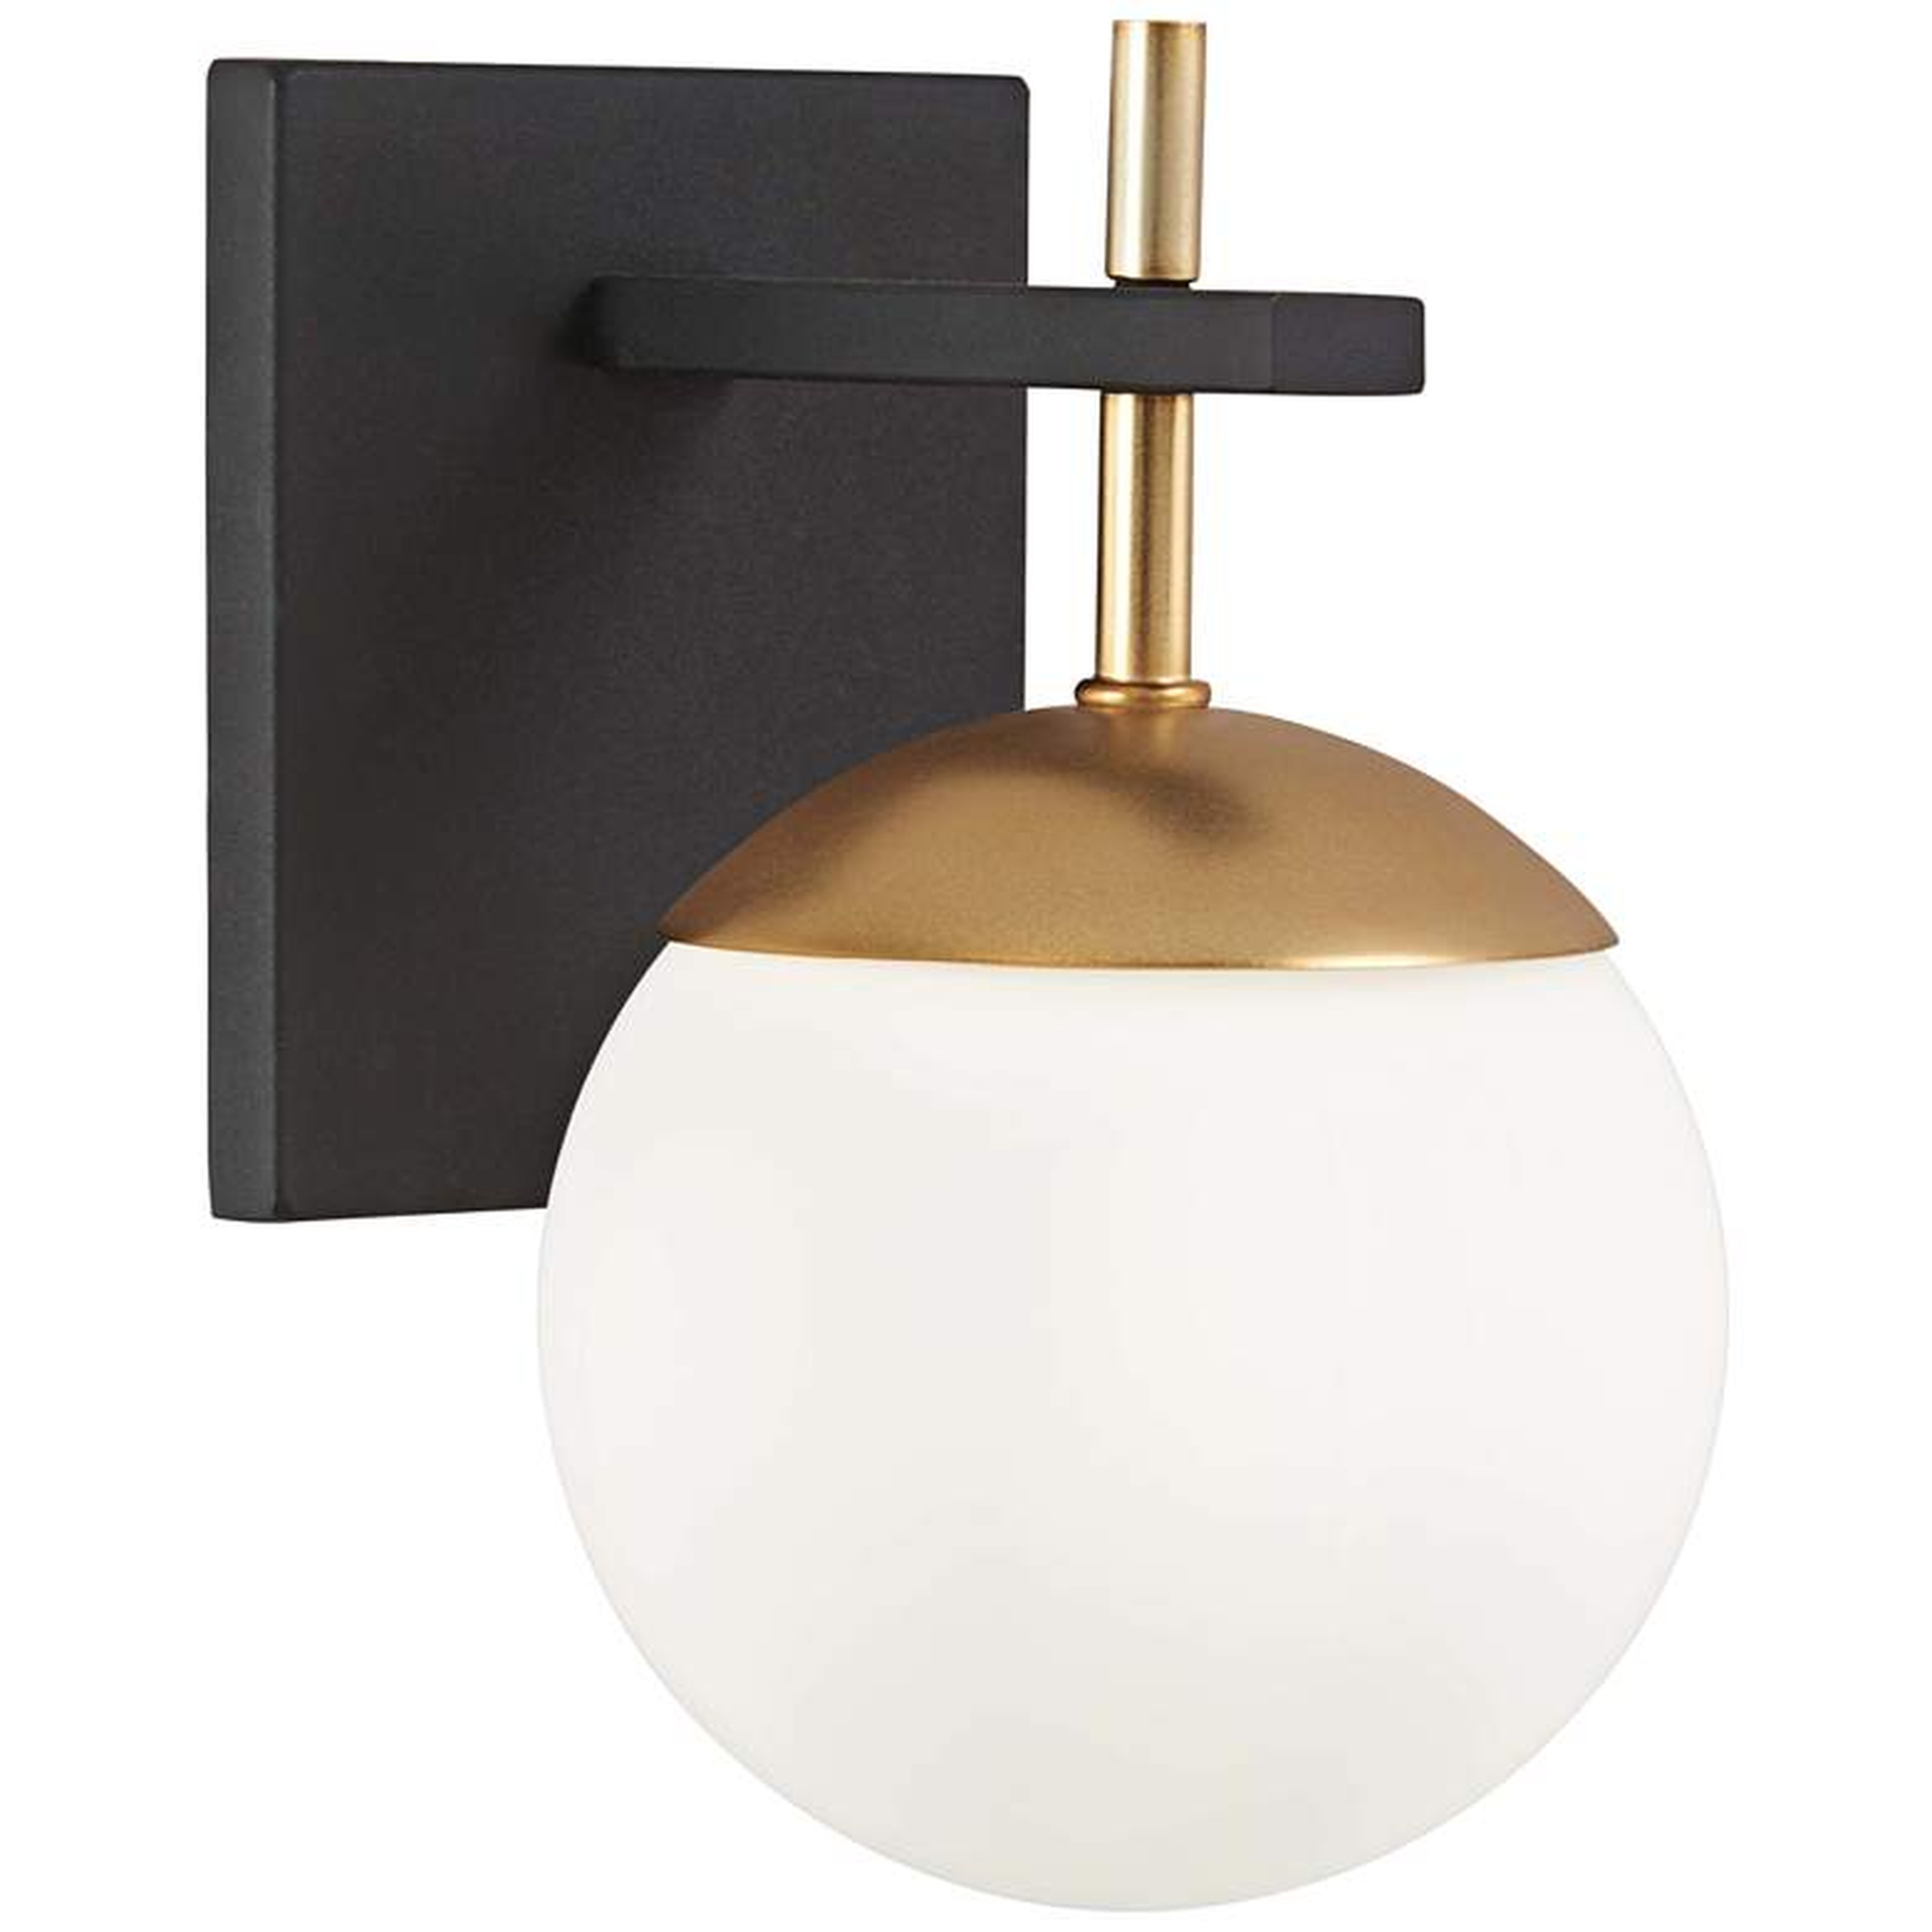 George Kovacs Alluria 9 3/4" High Black and Gold Wall Sconce - Style # 56G90 - Lamps Plus